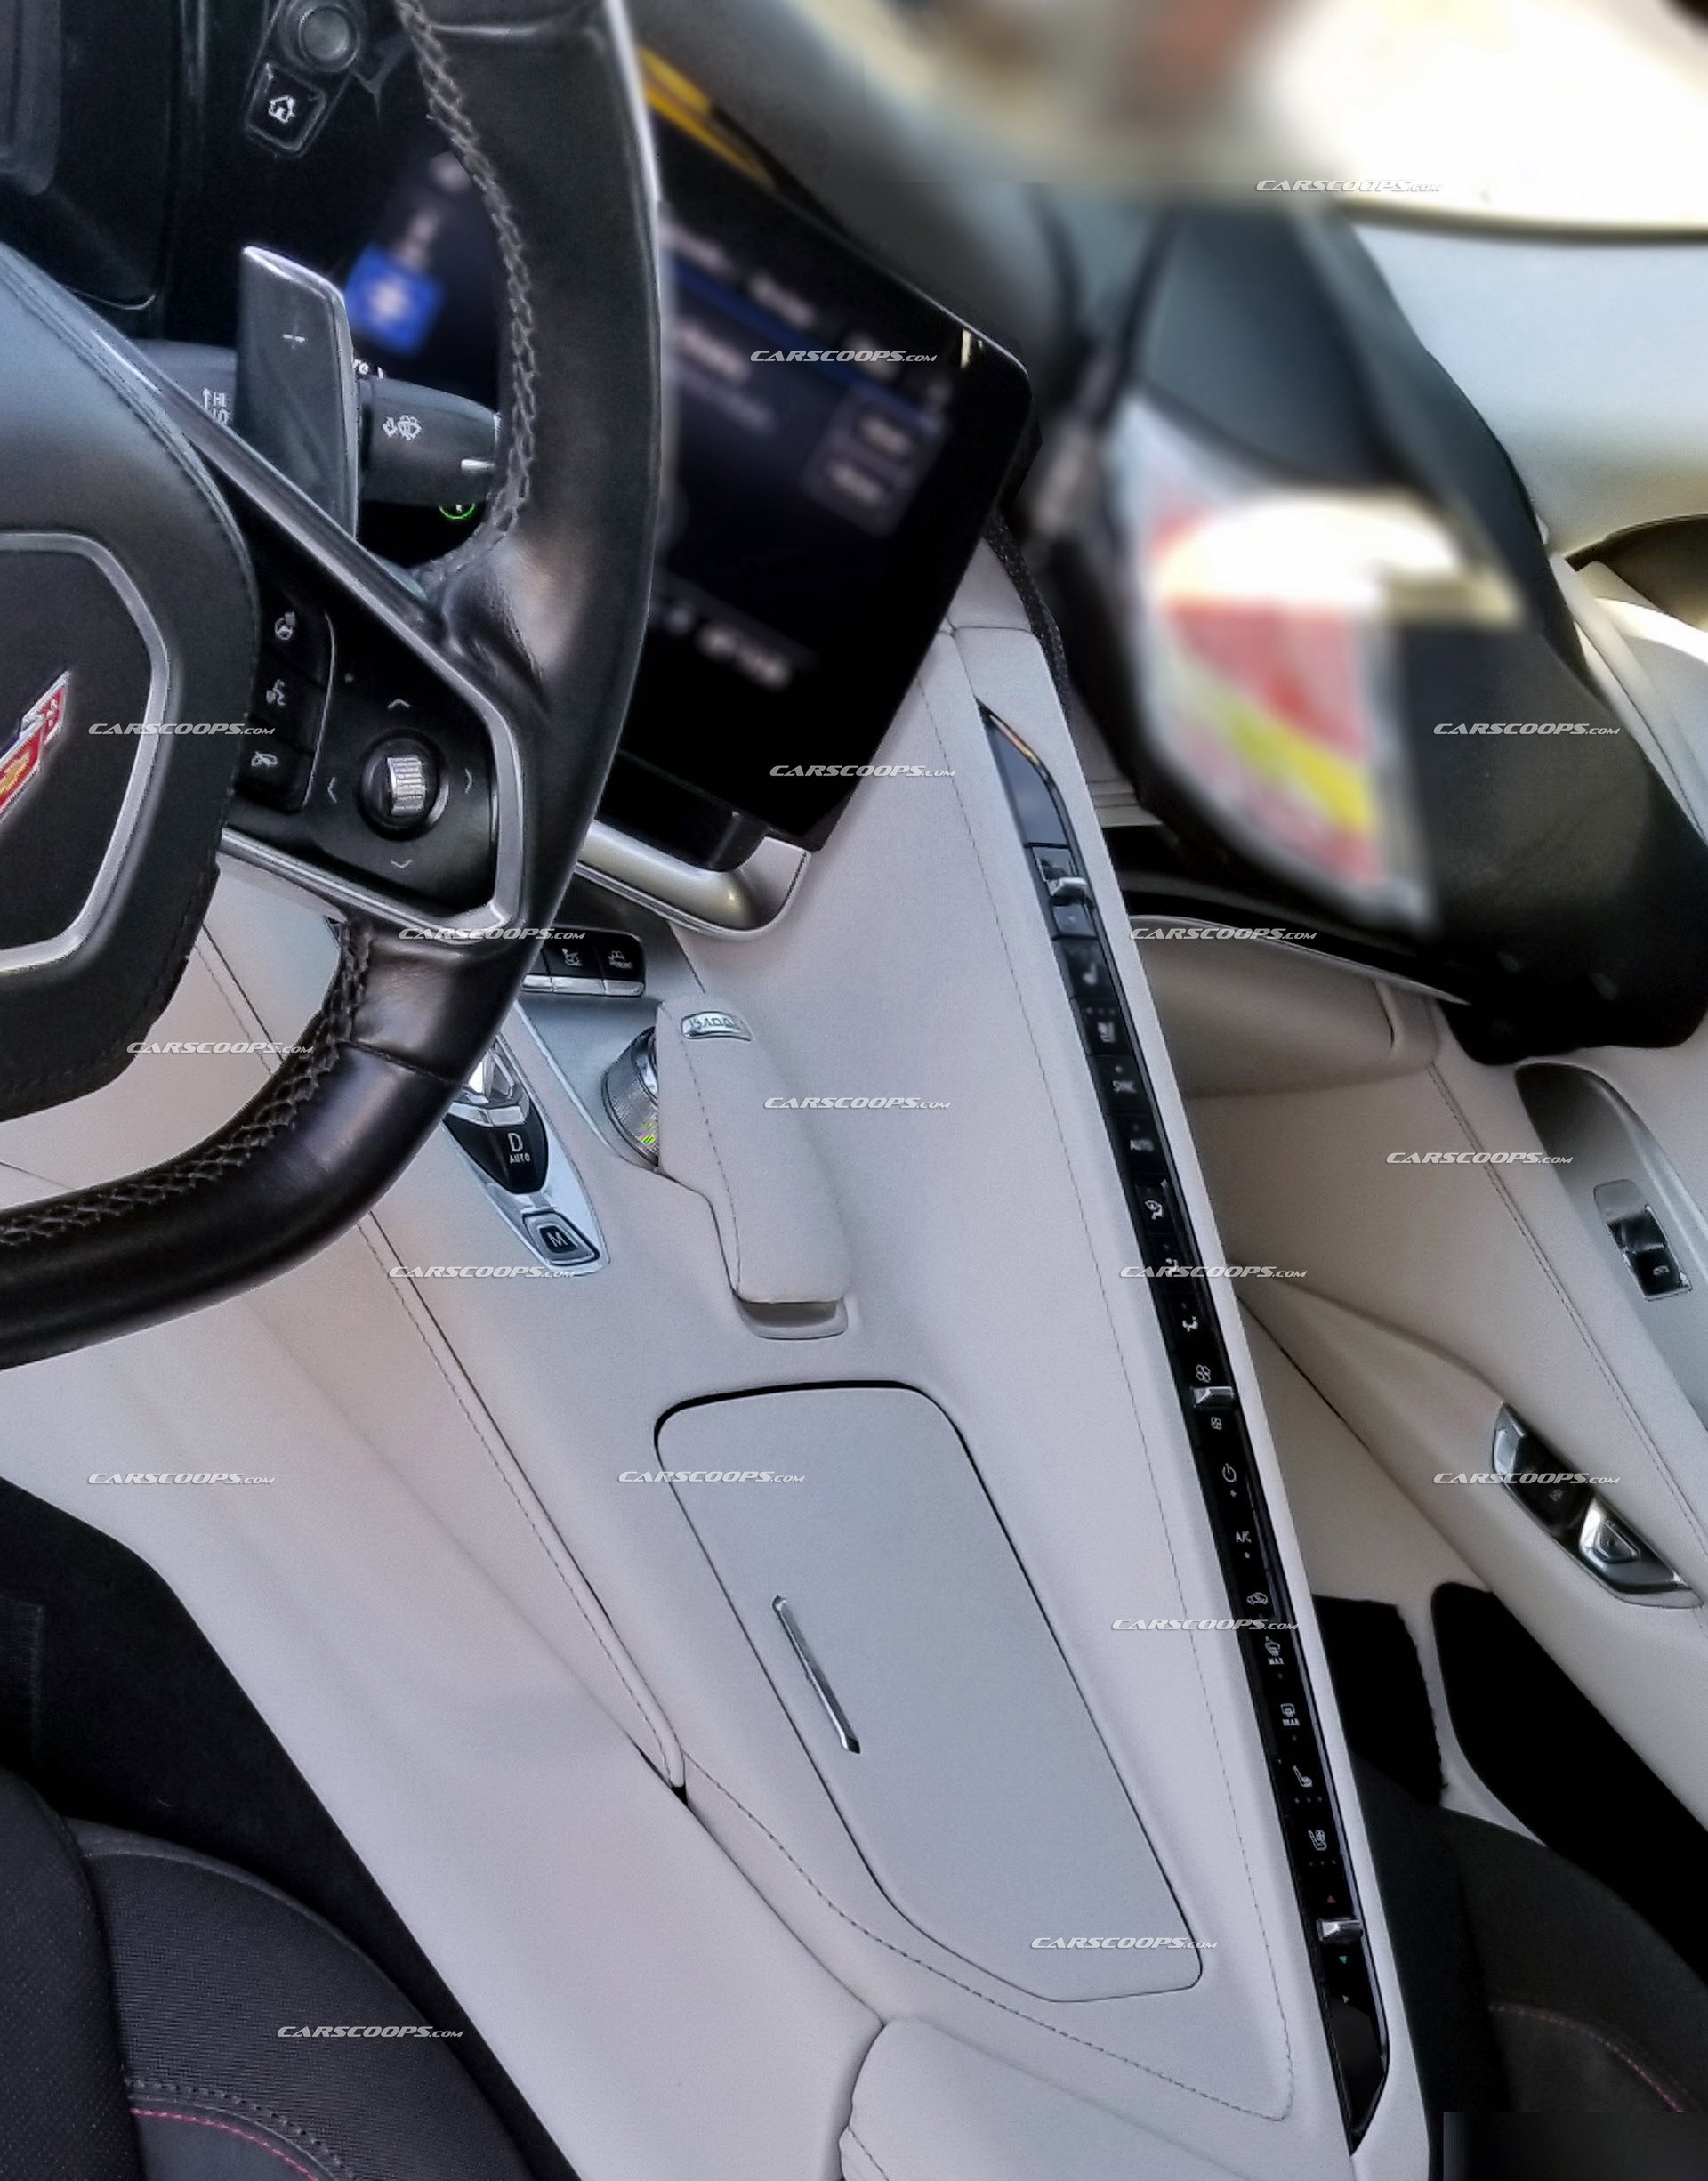 2020 Corvette C8 We Get Our First Peek Inside And It Looks